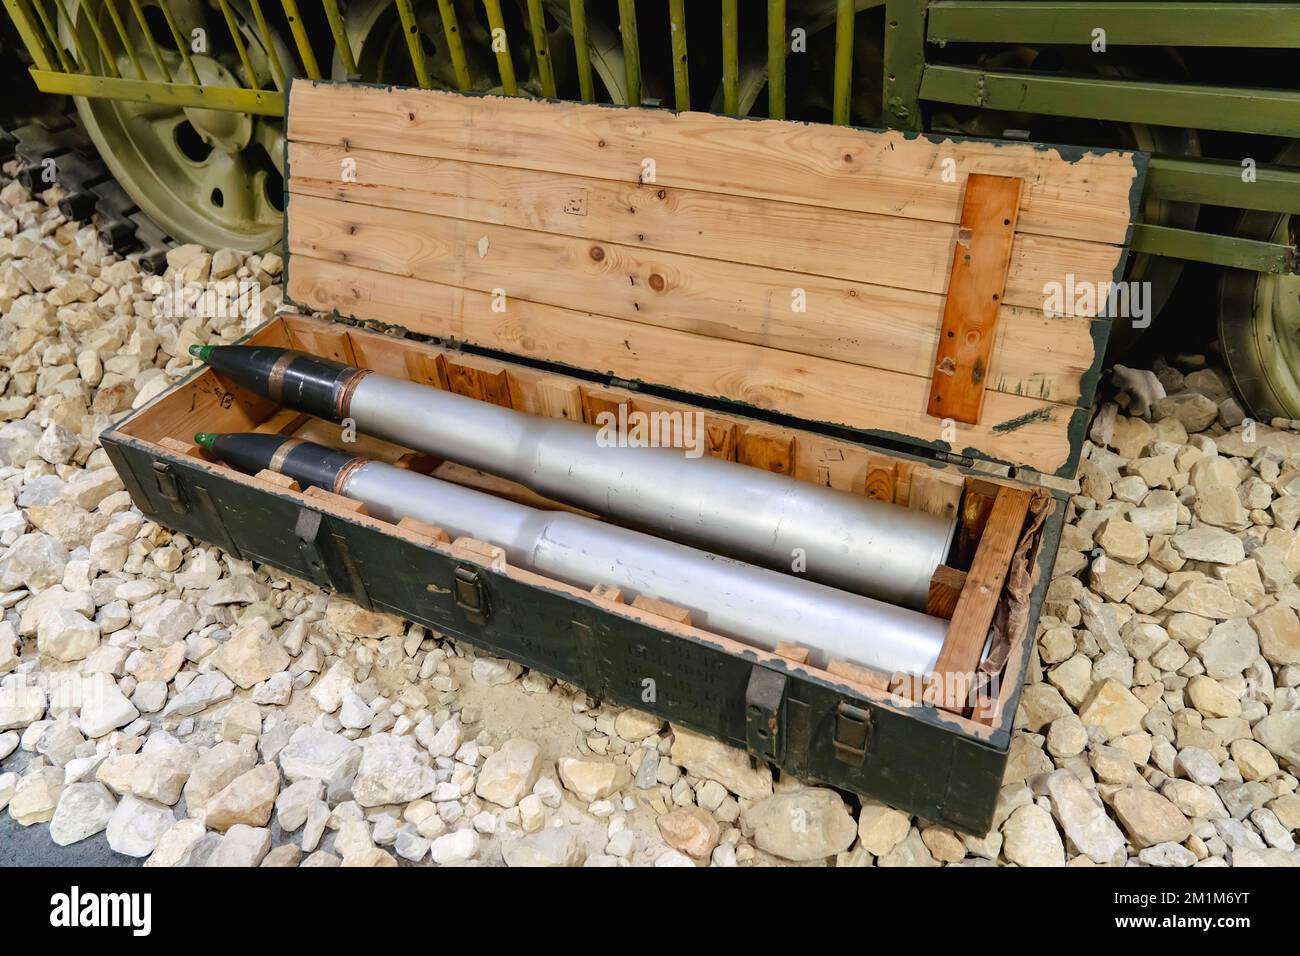 Shells for the tank in a green wooden box on the rocks near the tank. Supply of military ammunition. Stock Photo